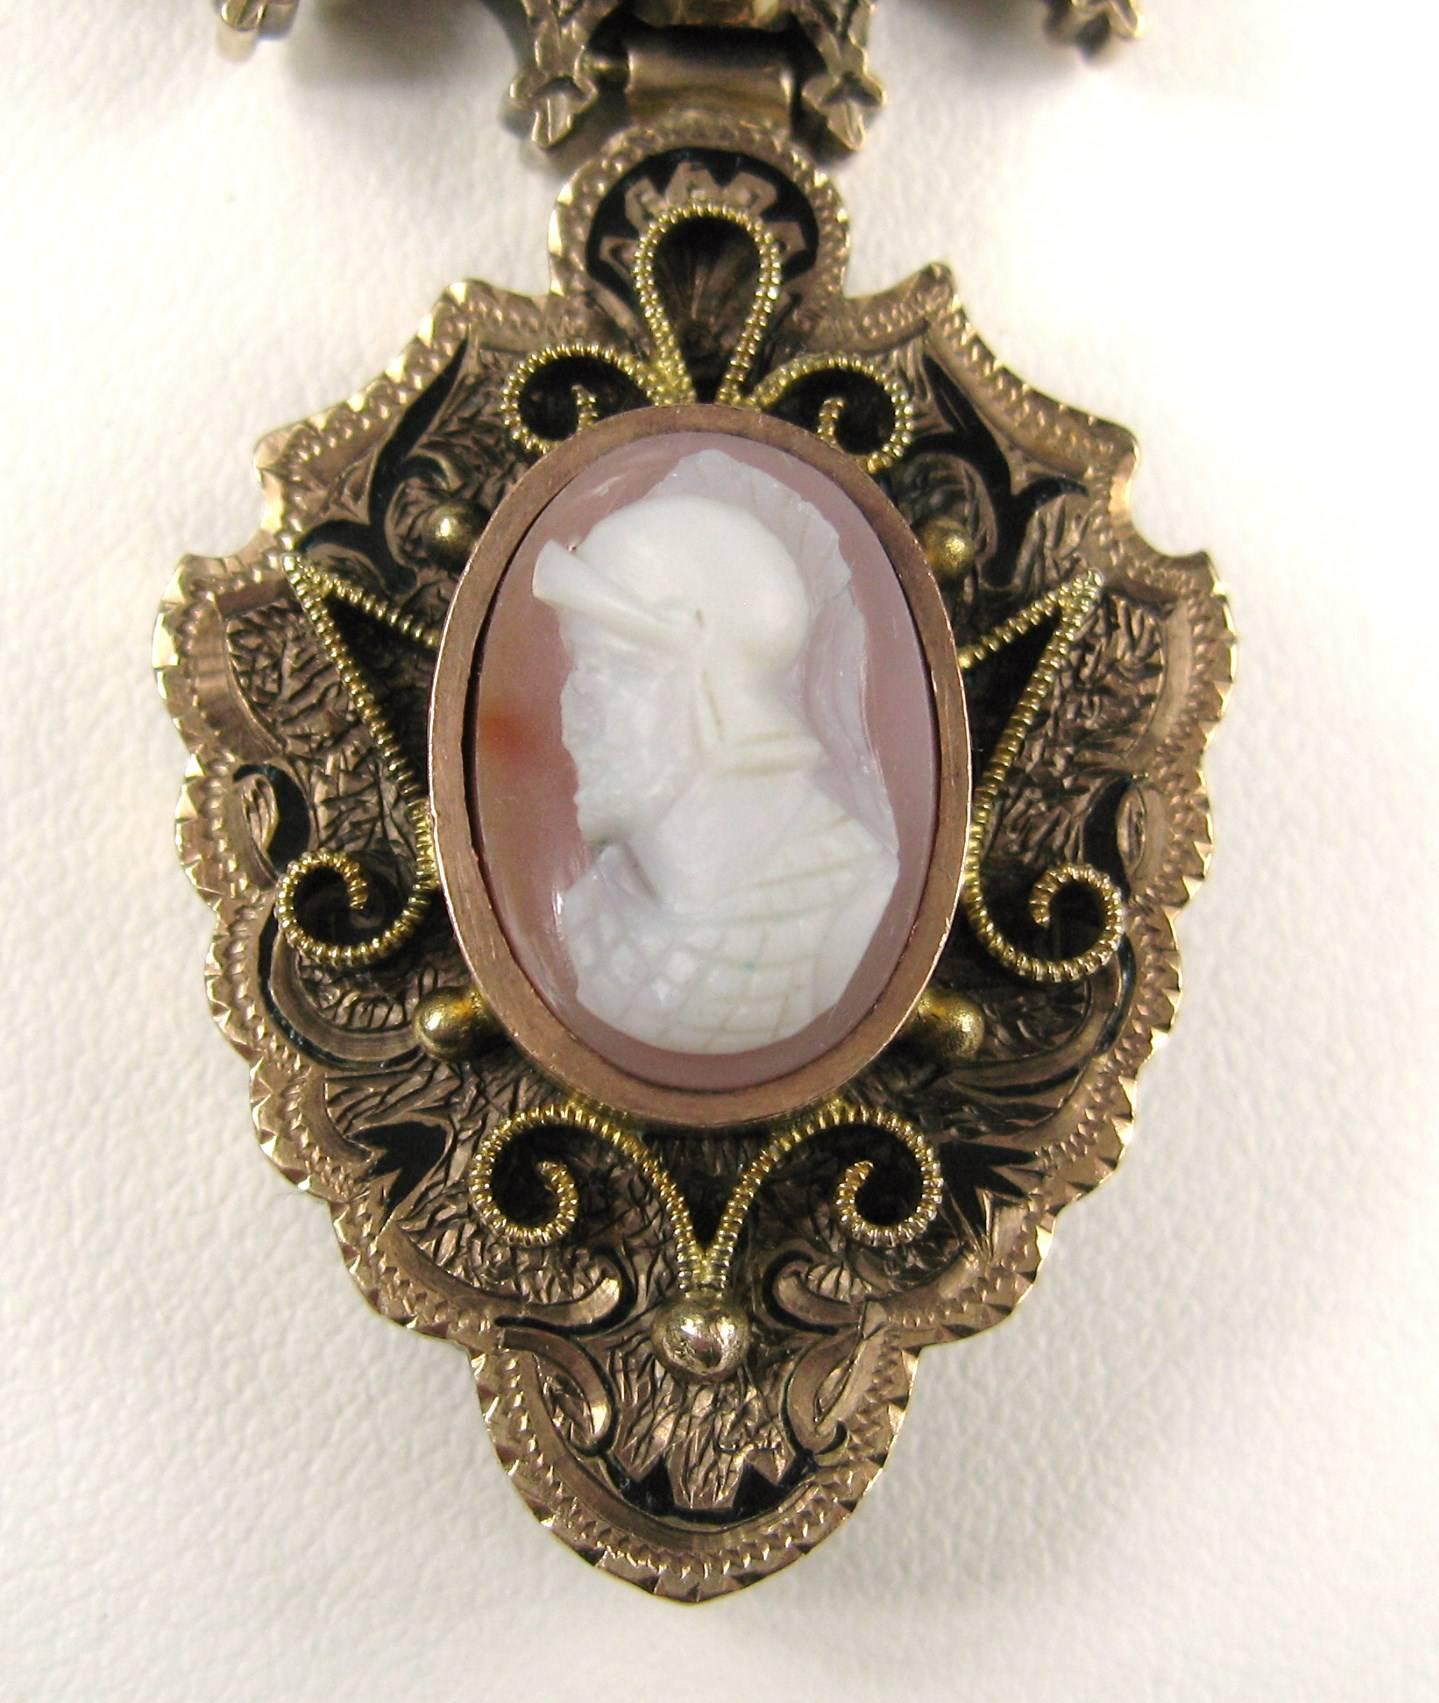 Stunning 10K Rose Gold Warrior Cameo necklace with stunning scroll work. Has a hidden slide clasp. The chain is 18